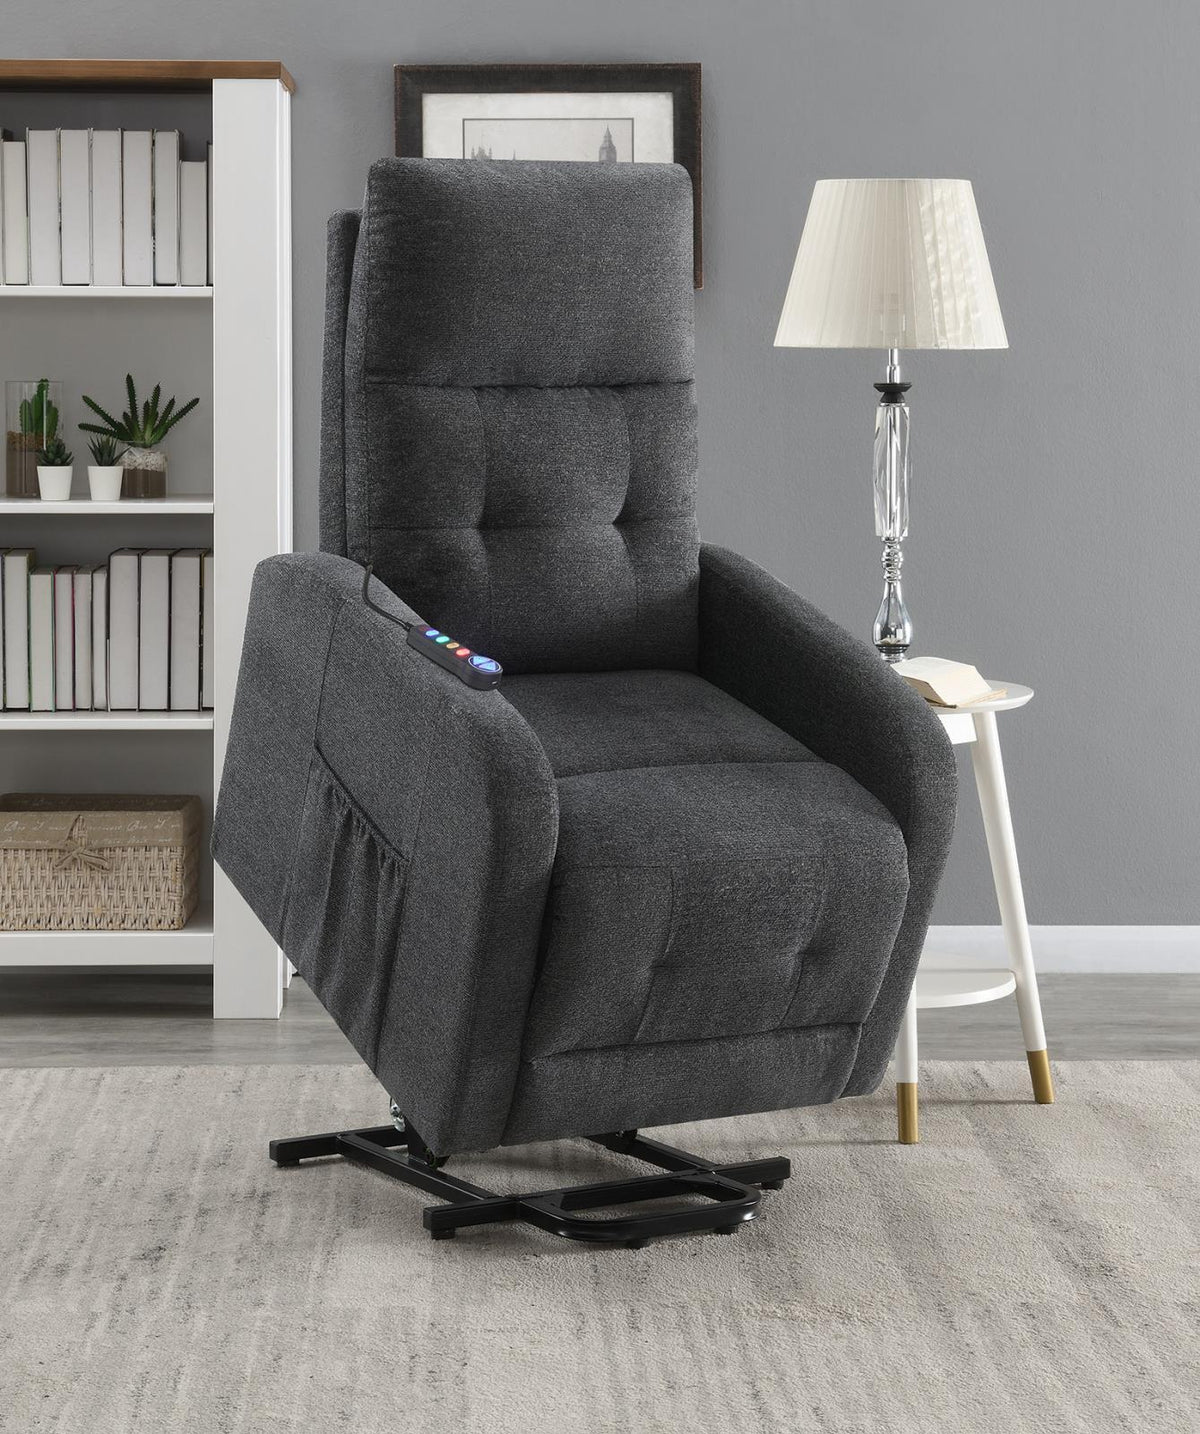 Howie Tufted Upholstered Power Lift Recliner Charcoal - Half Price Furniture